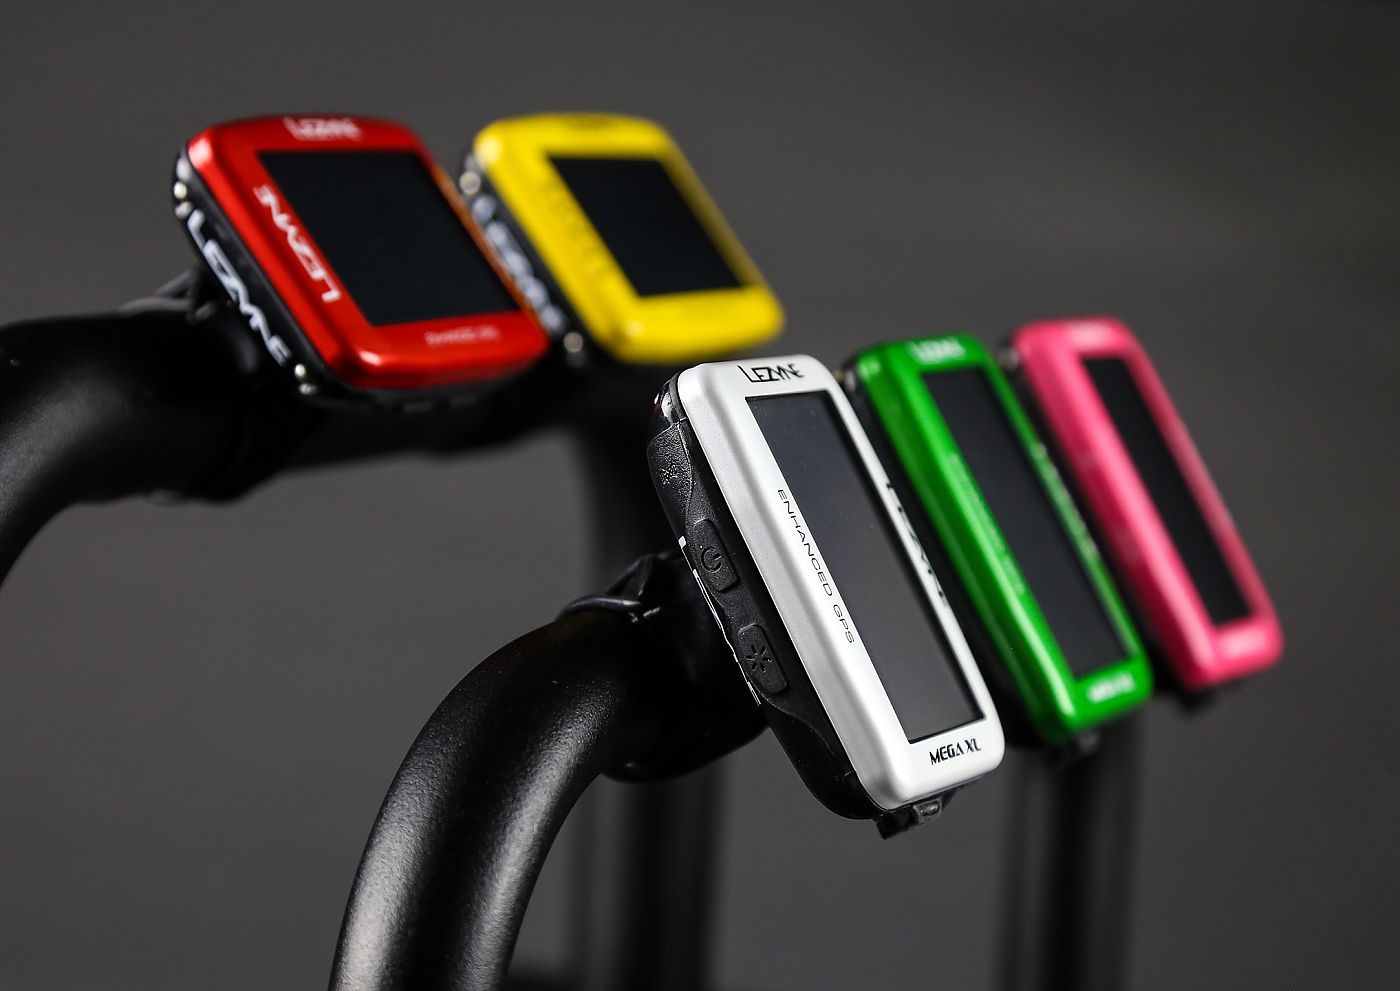 Lezyne adds a splash of color to its Mega XL GPS | Bicycle